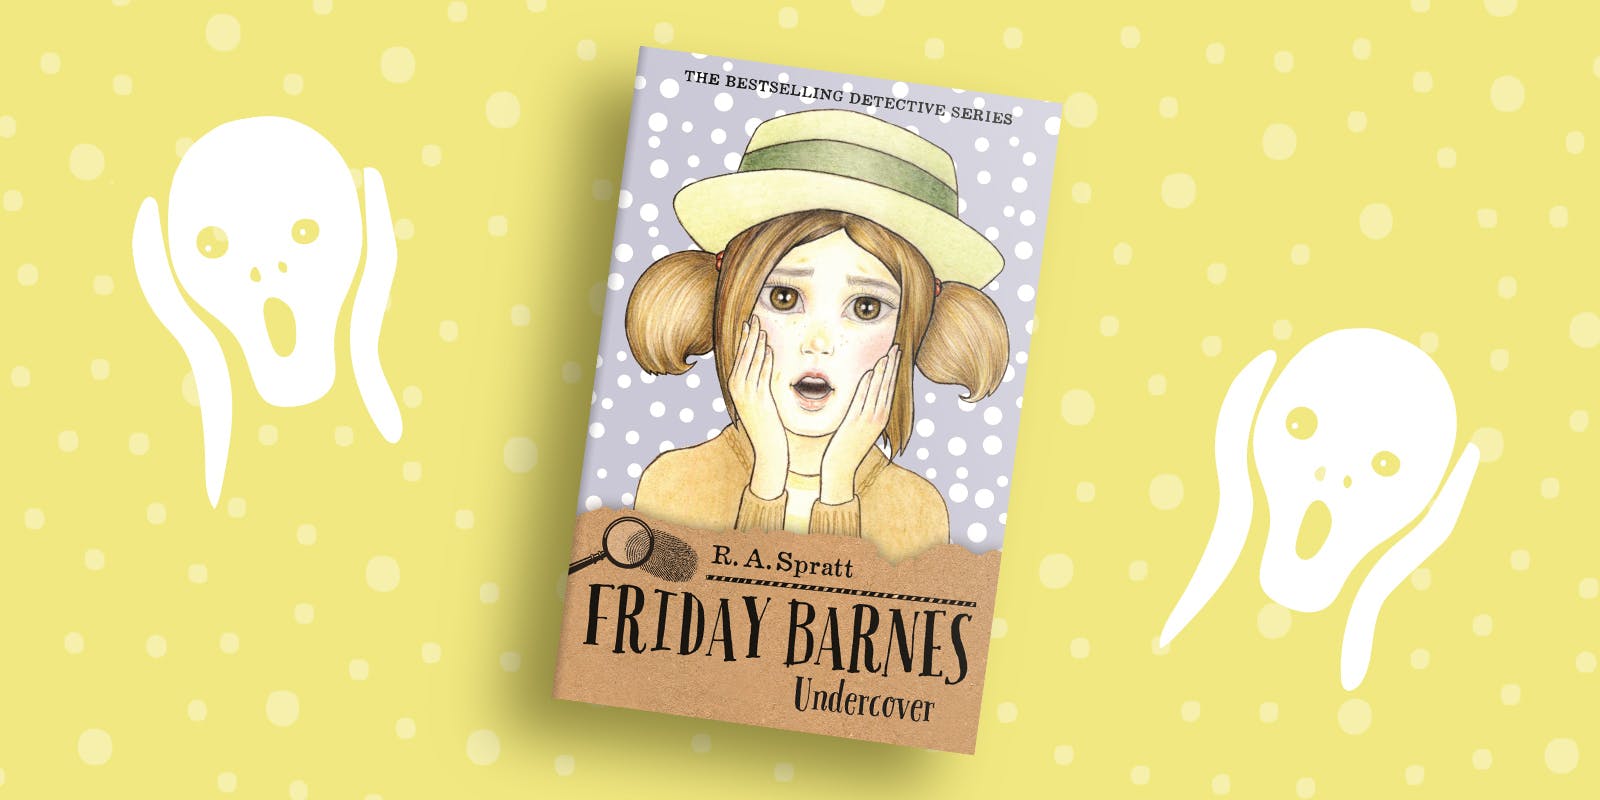 Author reveals process behind new Friday Barnes book cover 